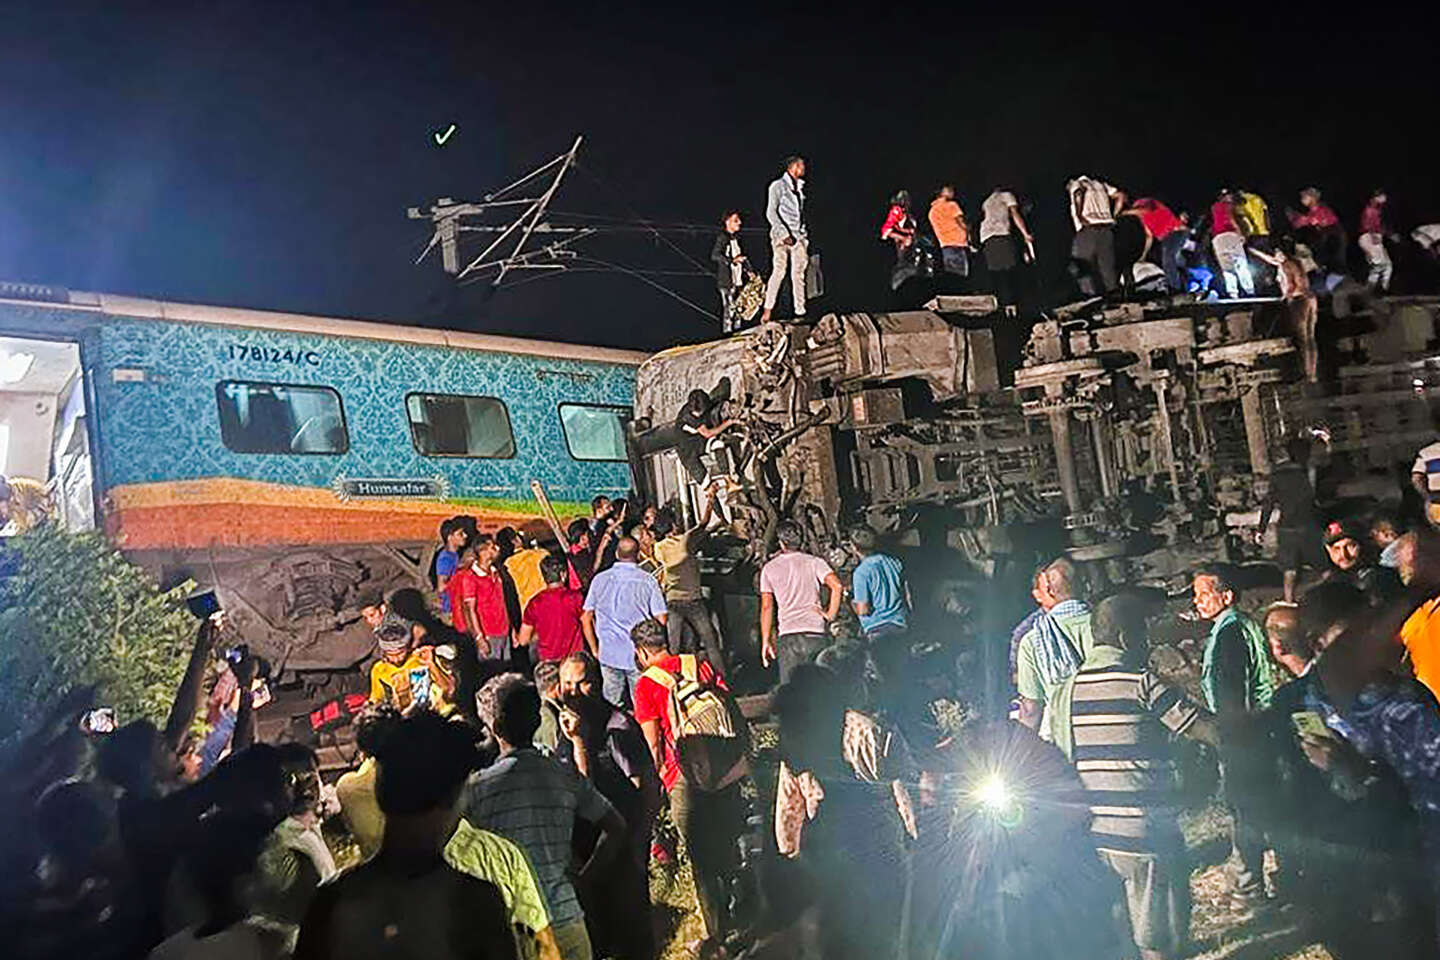 In India, a collision of two trains left at least 50 people dead and 500 injured